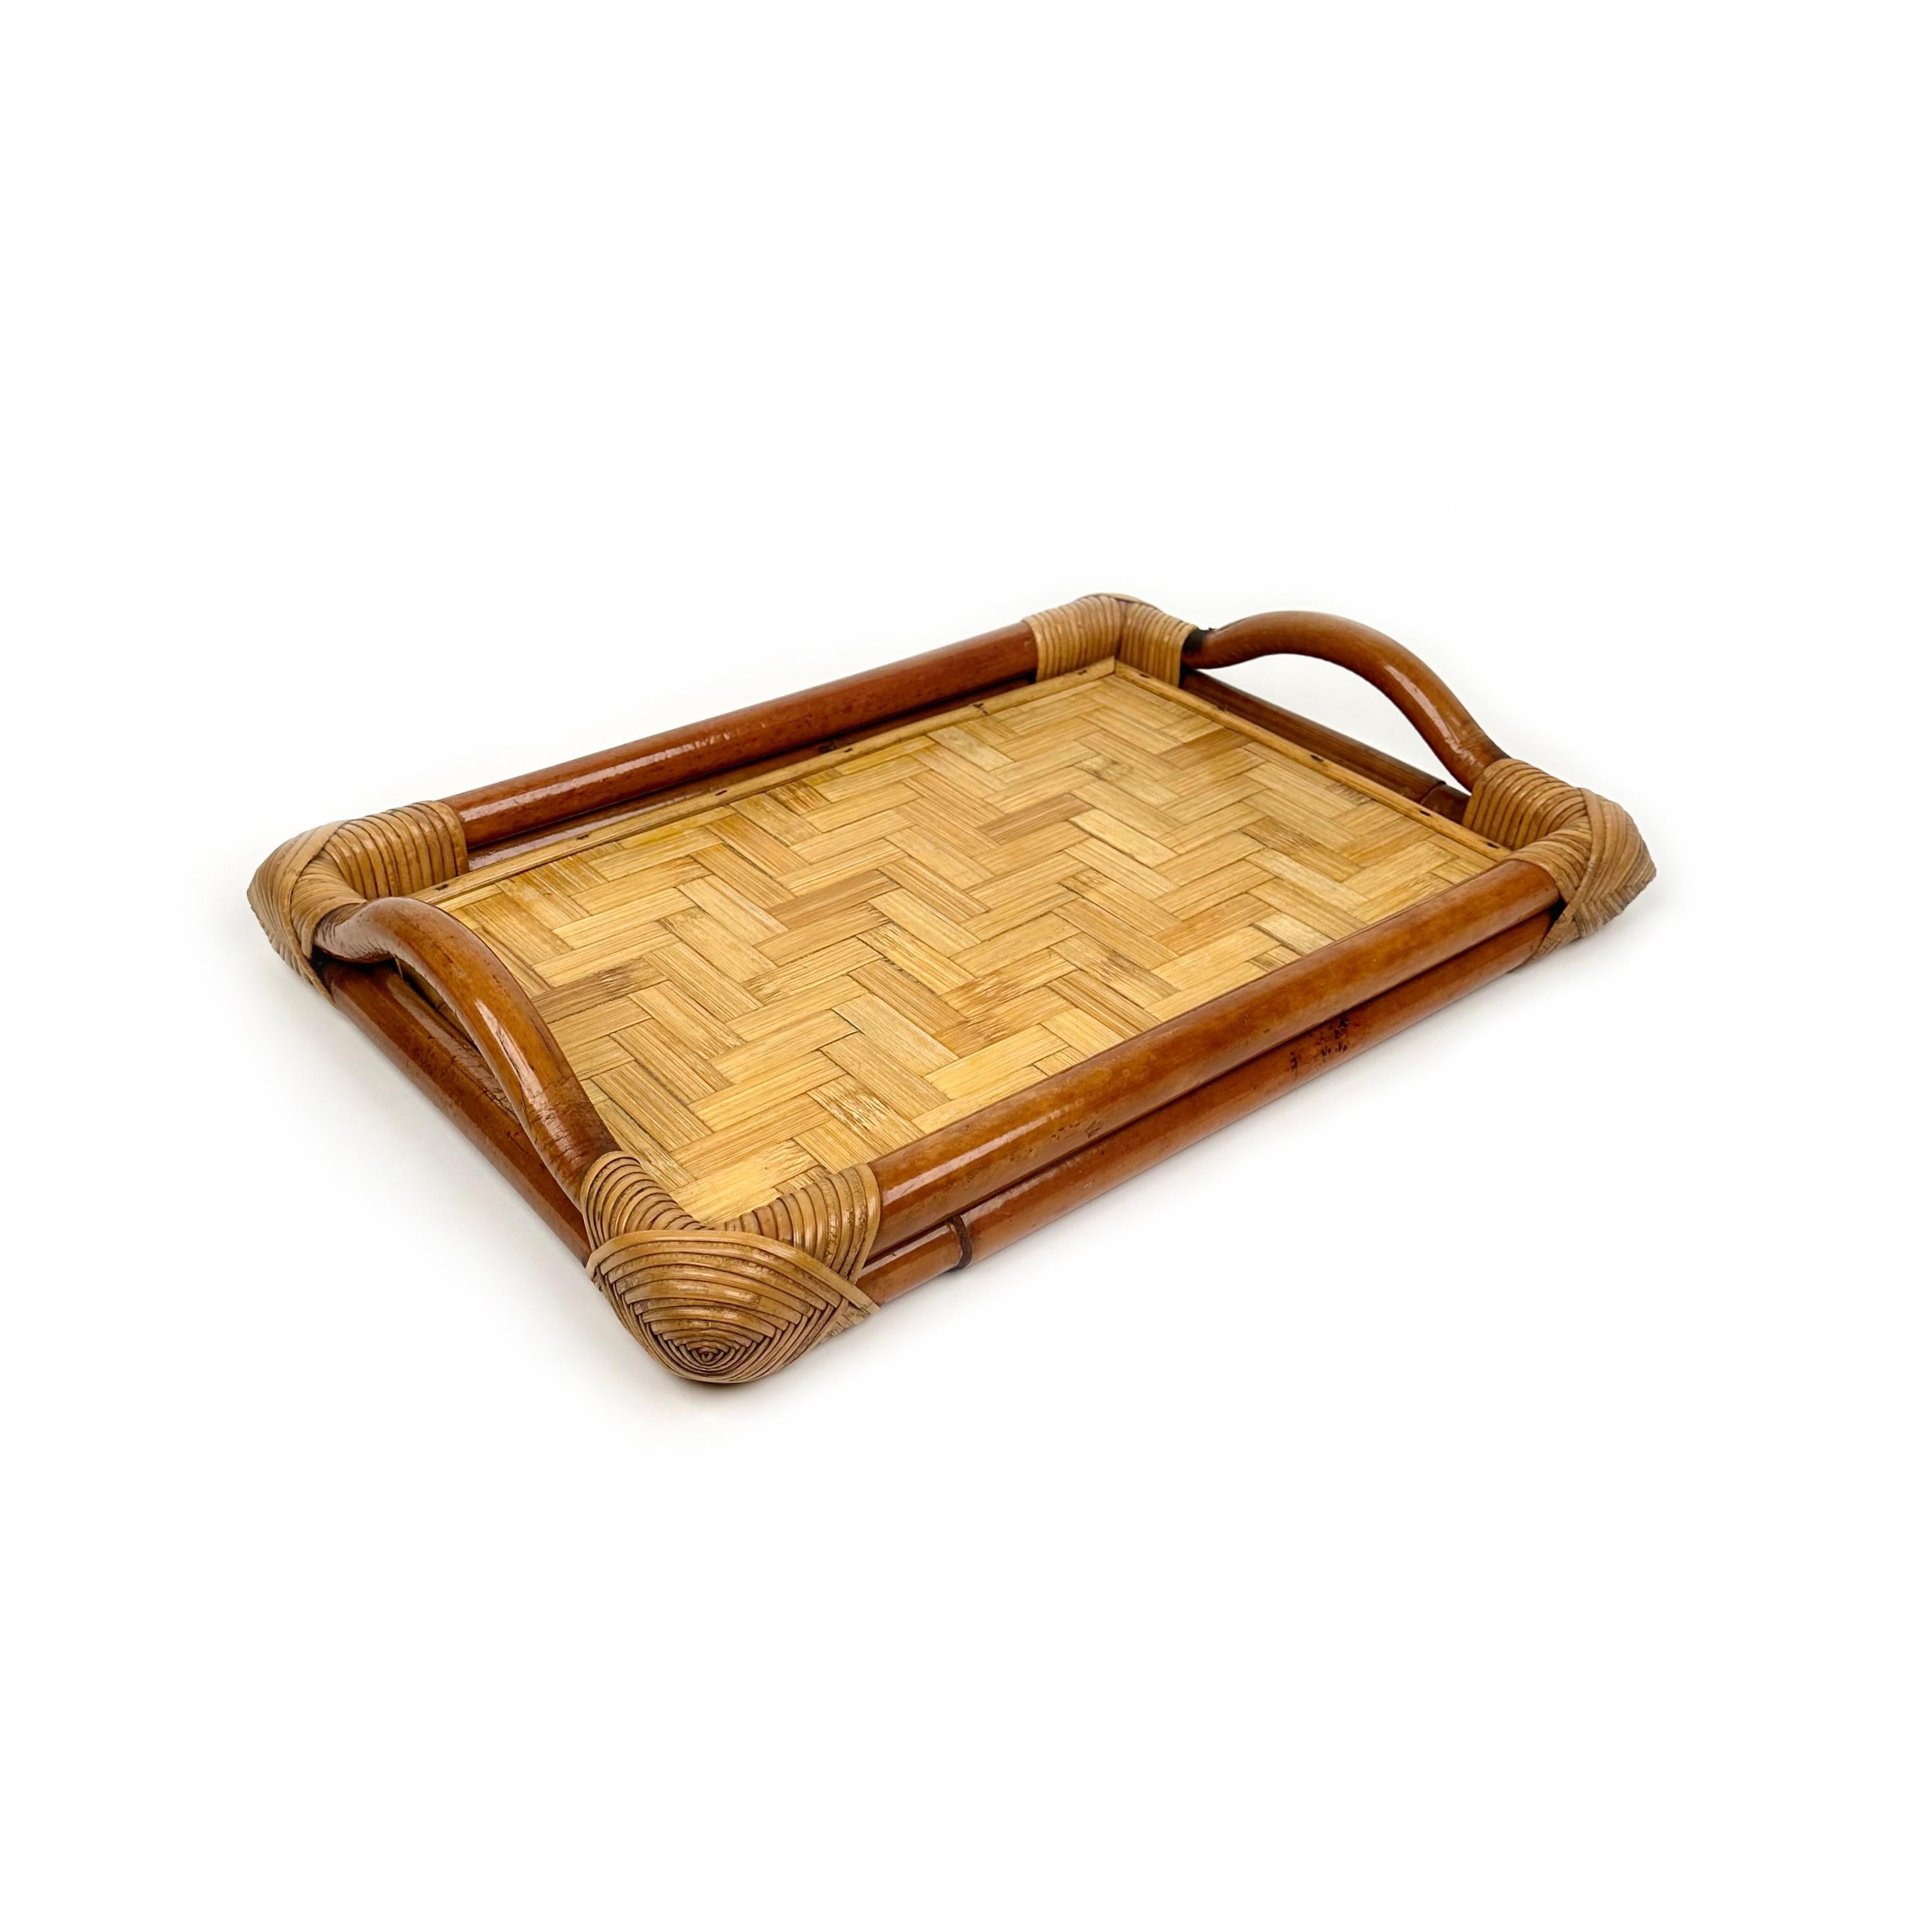 Late 20th Century Bamboo and Rattan Rectangular Serving Tray, Italy 1970s